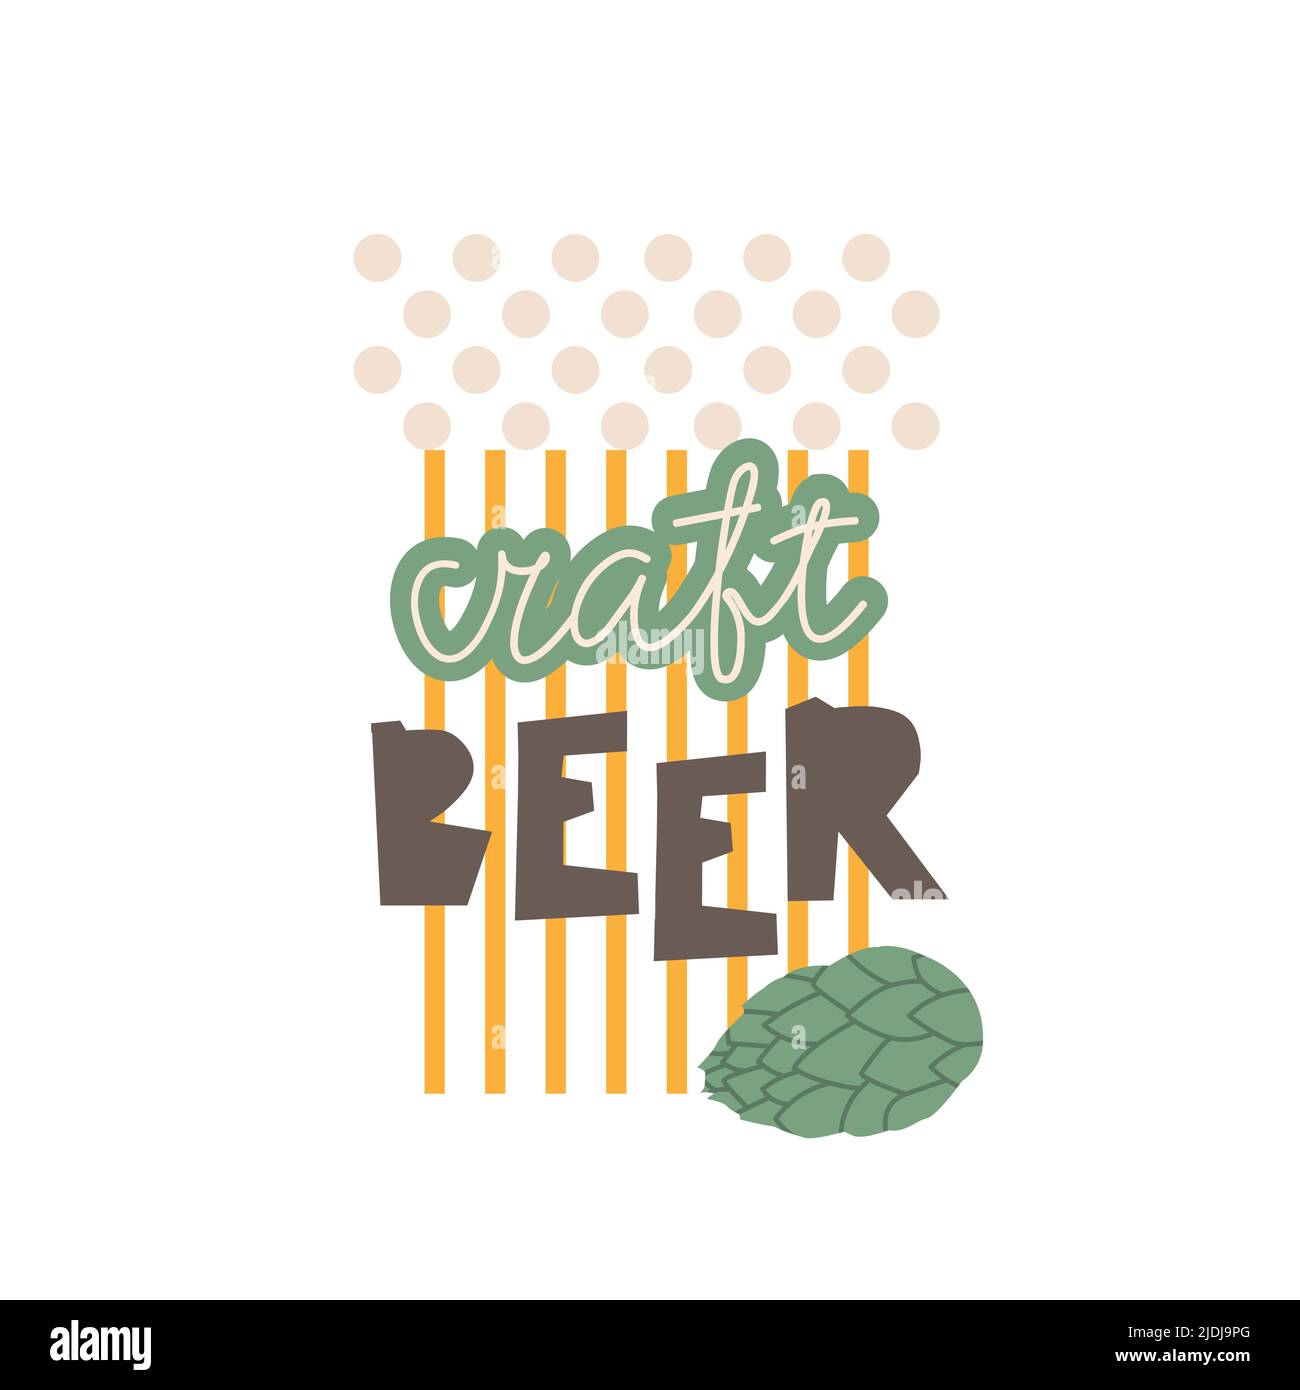 Simple logo for craft beer. Flat vector illustration of abstract decorative beer mug, hops and lettering. Design for a small brewery or beer festival Stock Vector